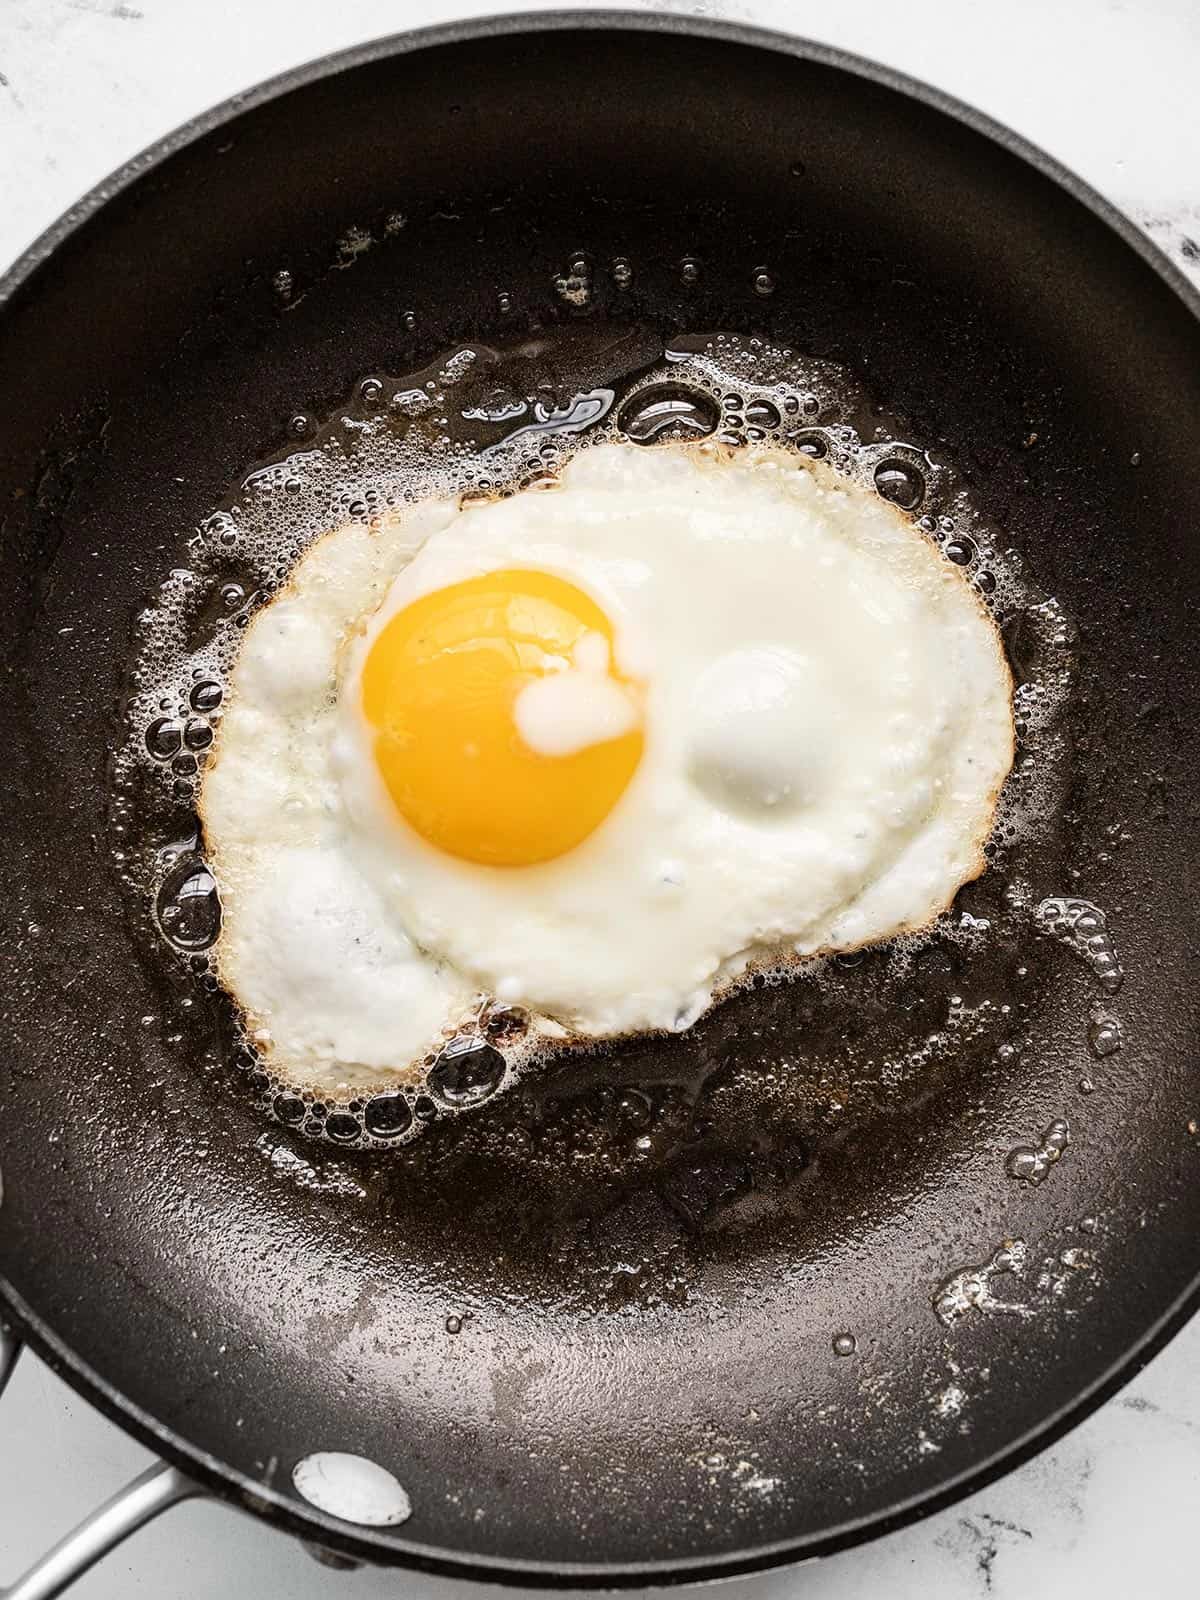 5 Skillet Cooking Techniques You Need to Know